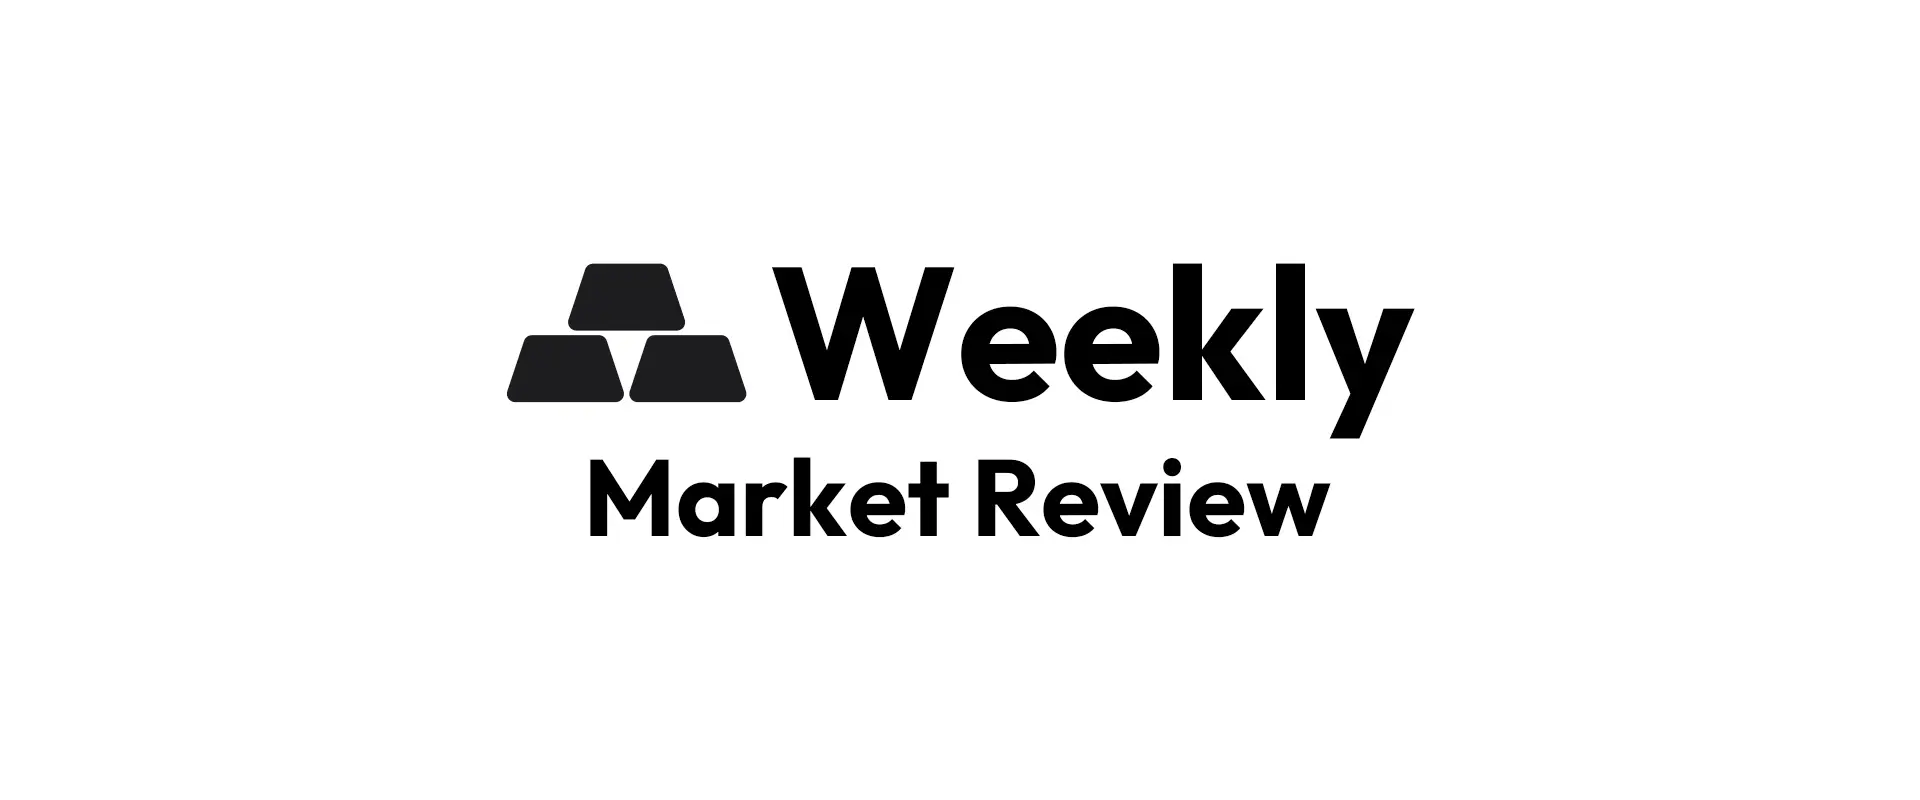 Weekly market review